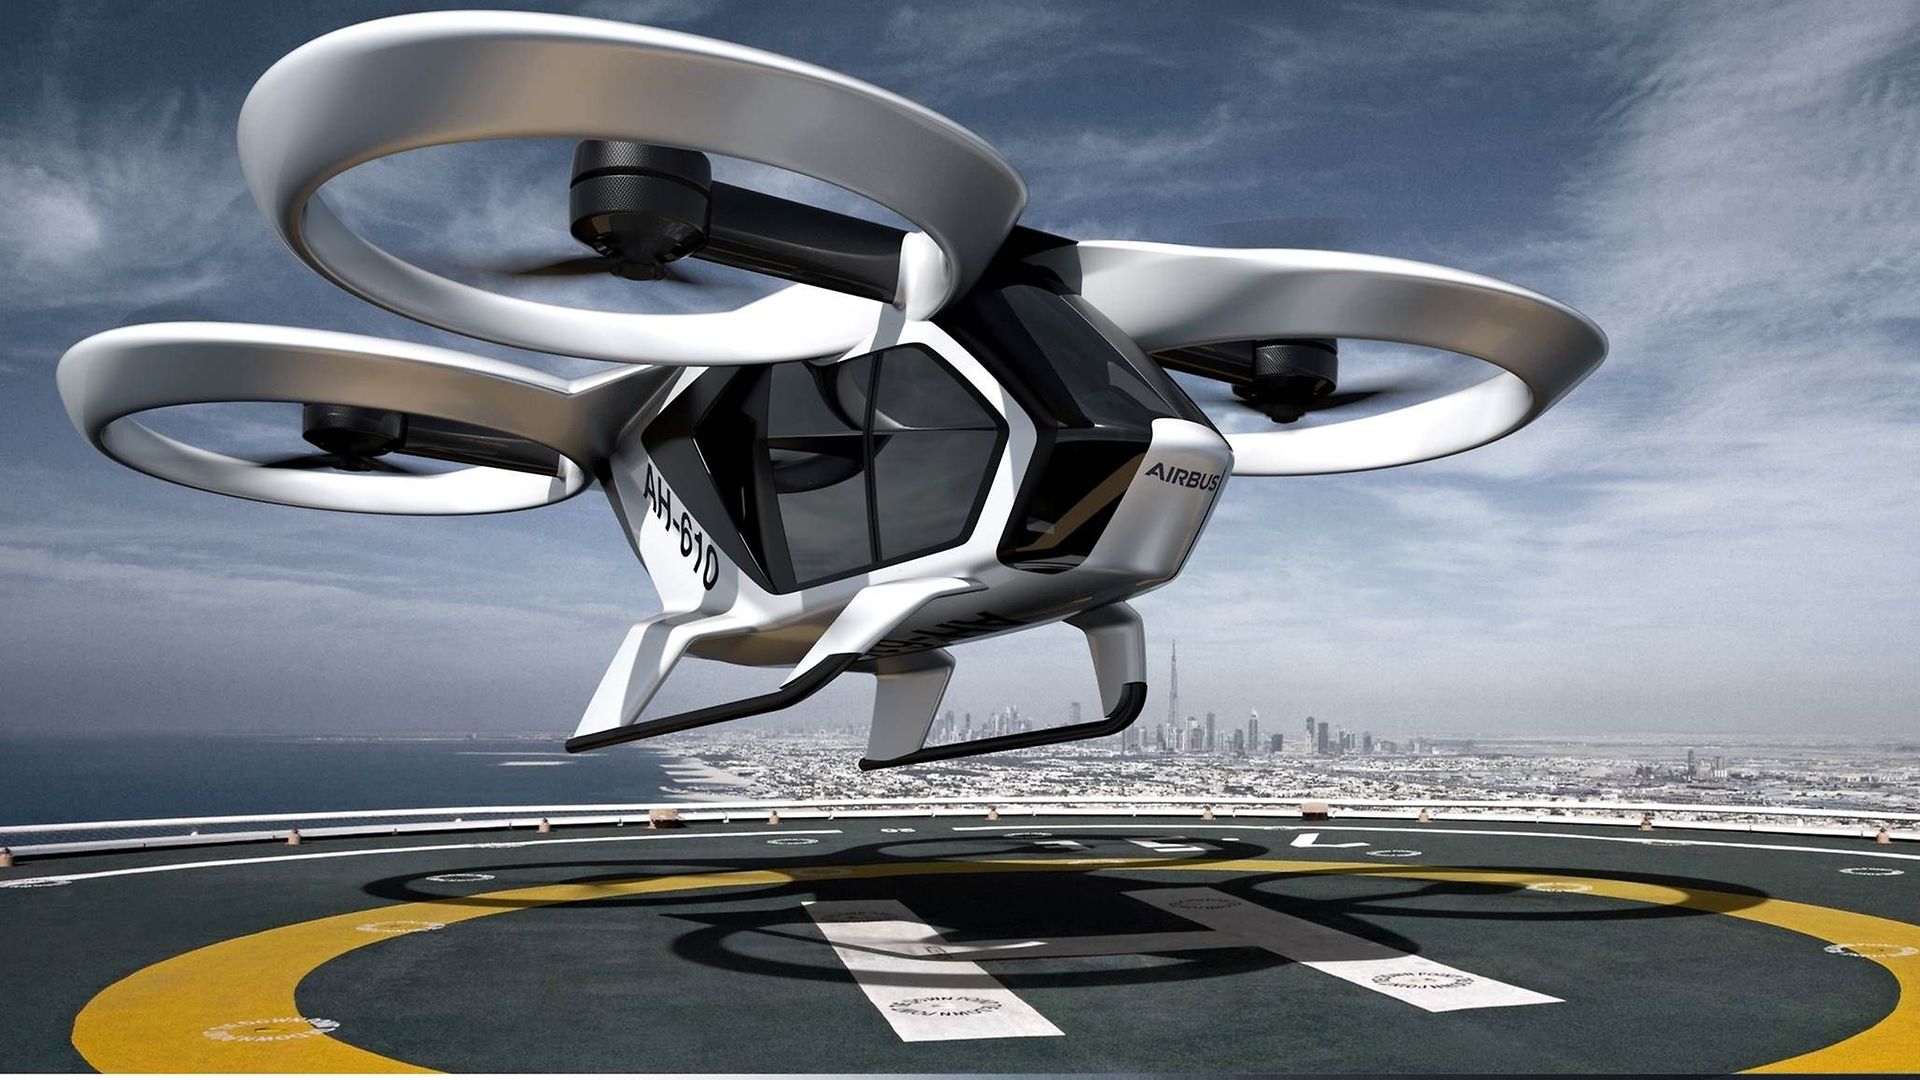 Experts estimate that there could be up to 10,000 flying taxis in service as soon as 2030